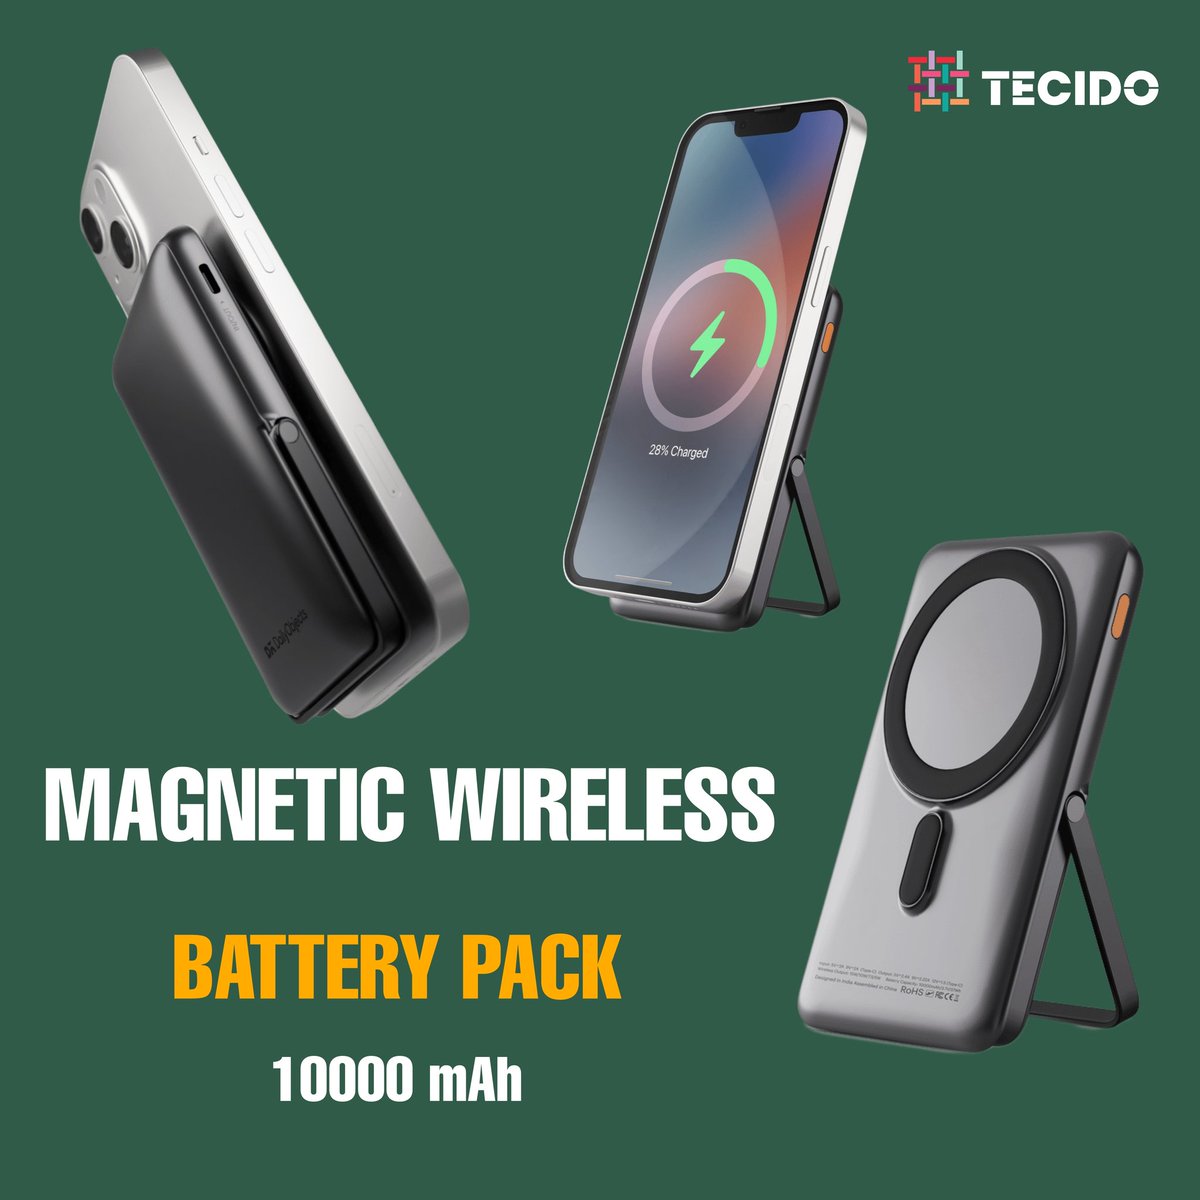 Unleash the power of wireless charging with our 10000 mAh magnetic battery pack! 🔋🔌

#corporategifting #employeeappreciation #employeeengagement #employeebenefits #brandedgifts #SwagKits #customization #teambuilding #WirelessPower #MagneticCharging #PortableEnergy